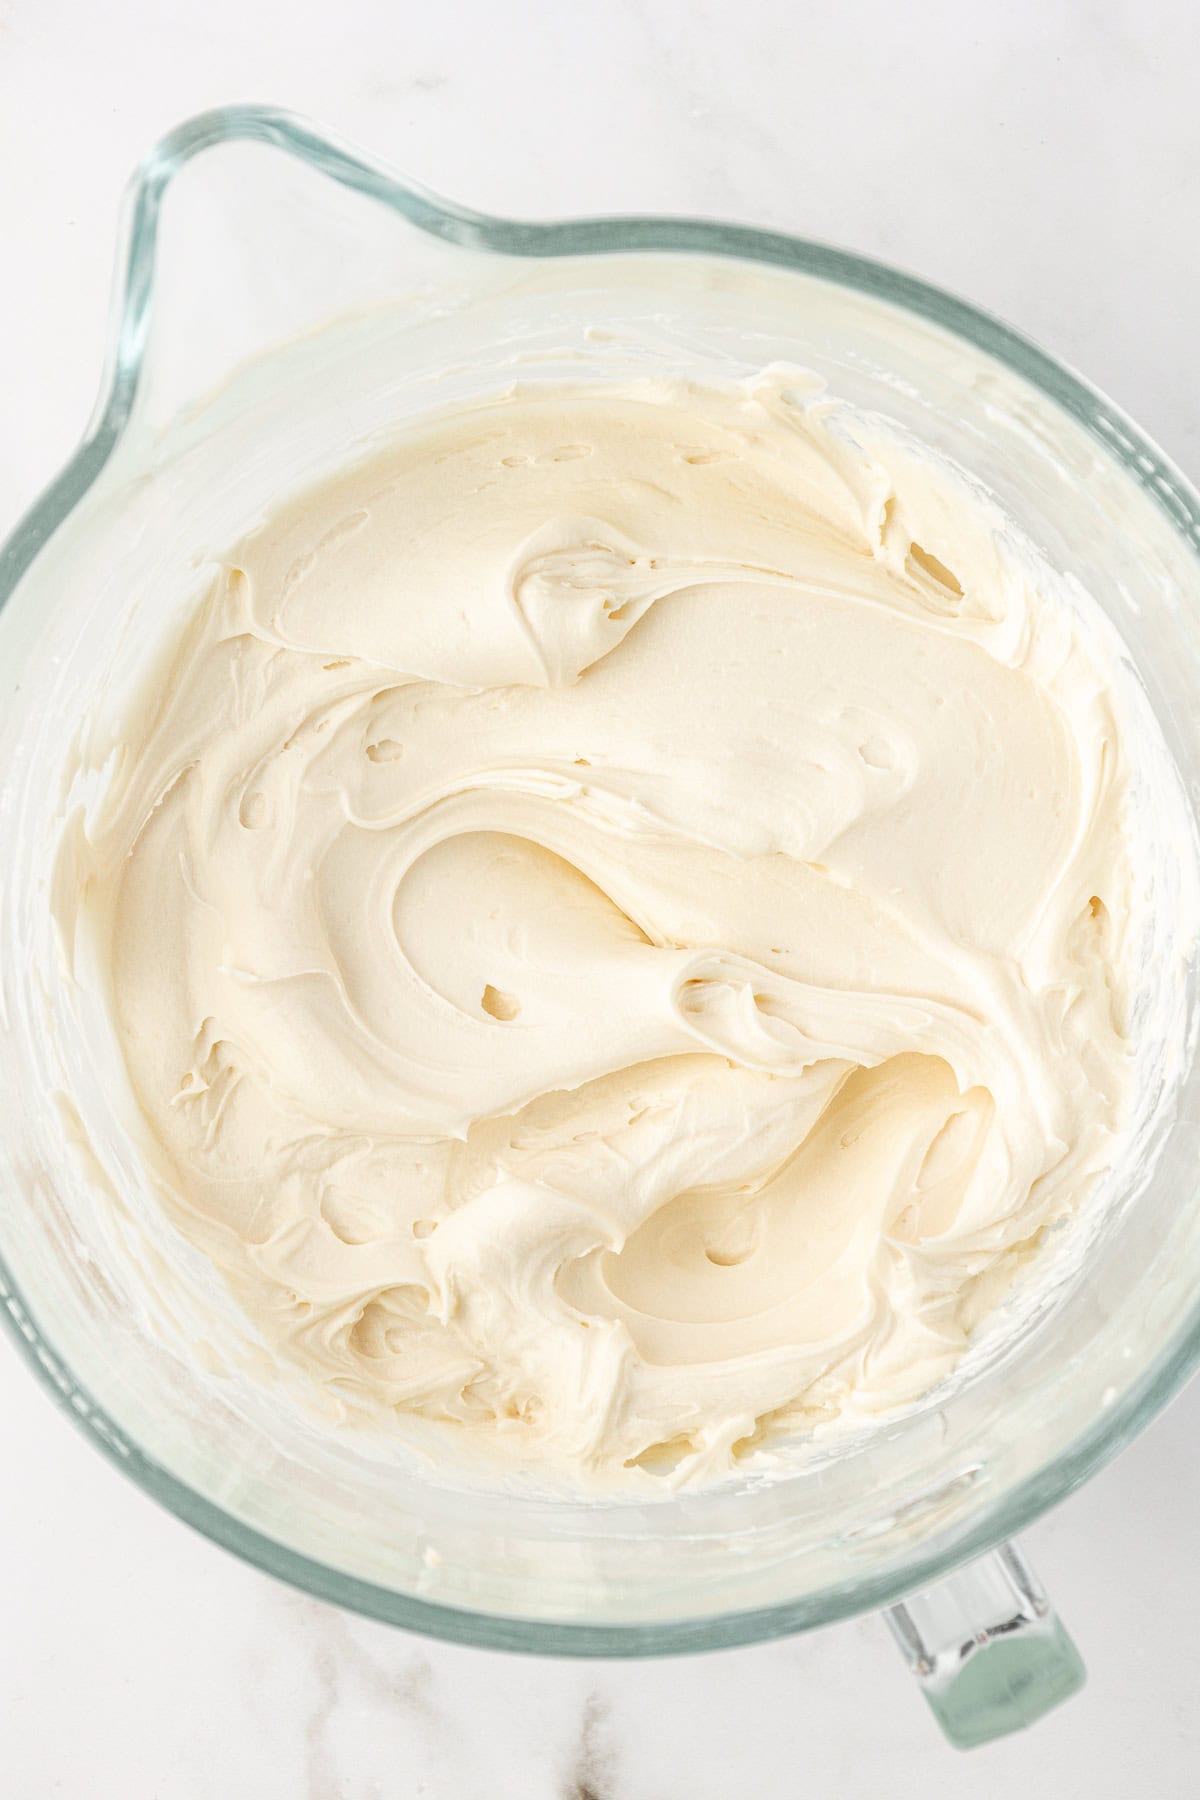 vanilla frosting in a clear glass bowl